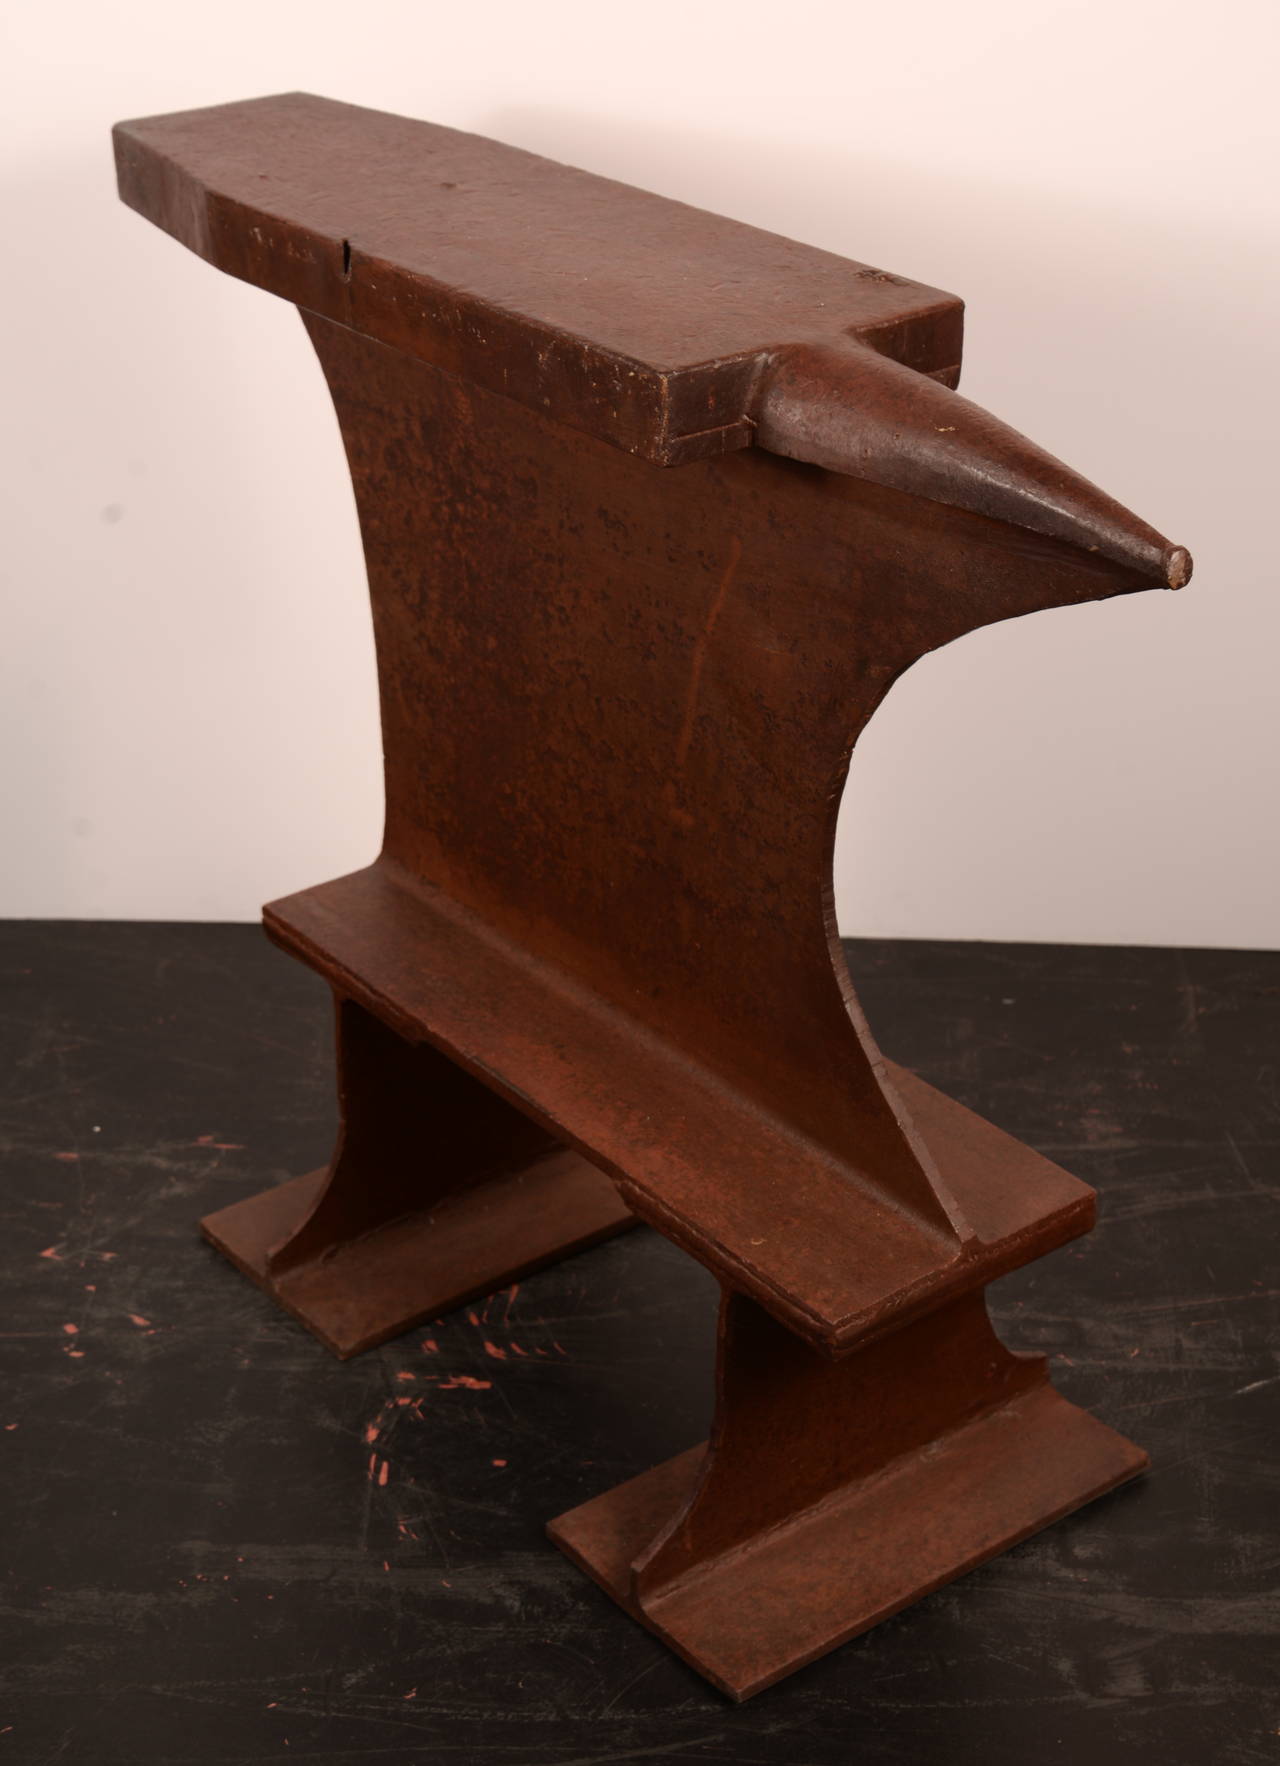 All steel vintage anvil to shape tin objects.  This happens to work wonderfully as a sculptural side table.